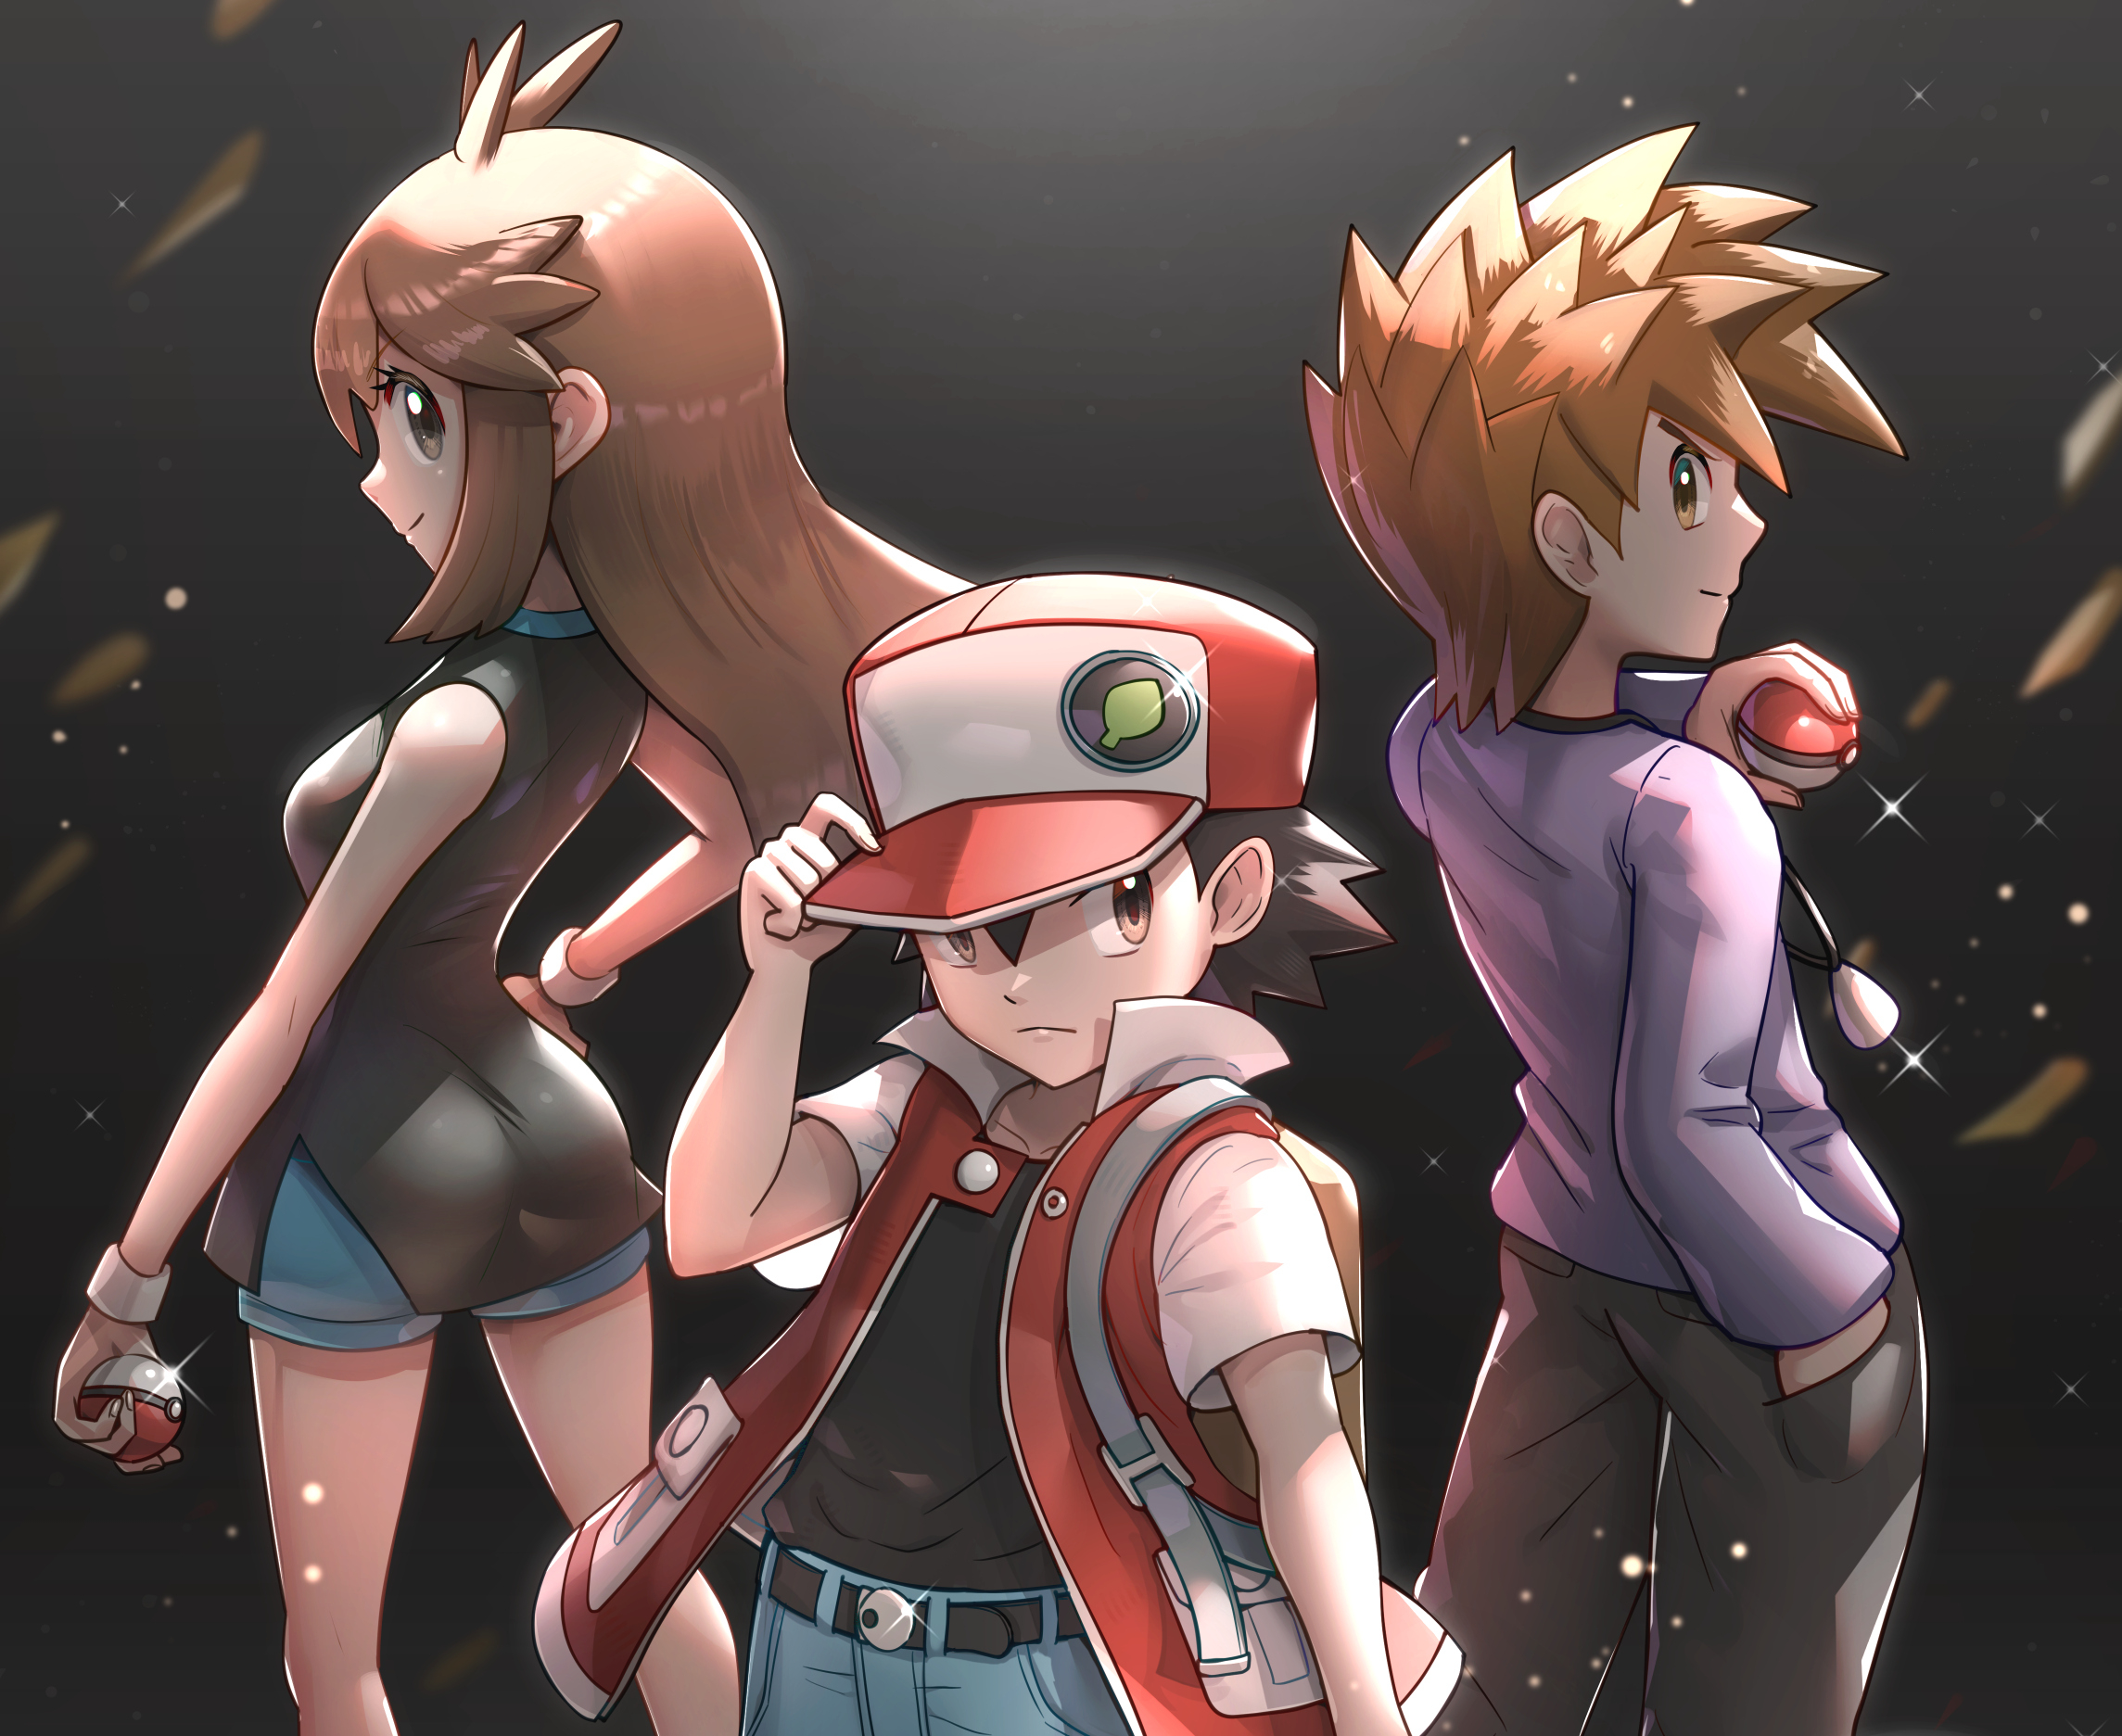 Download Pokemon: Red And Blue wallpapers for mobile phone, free